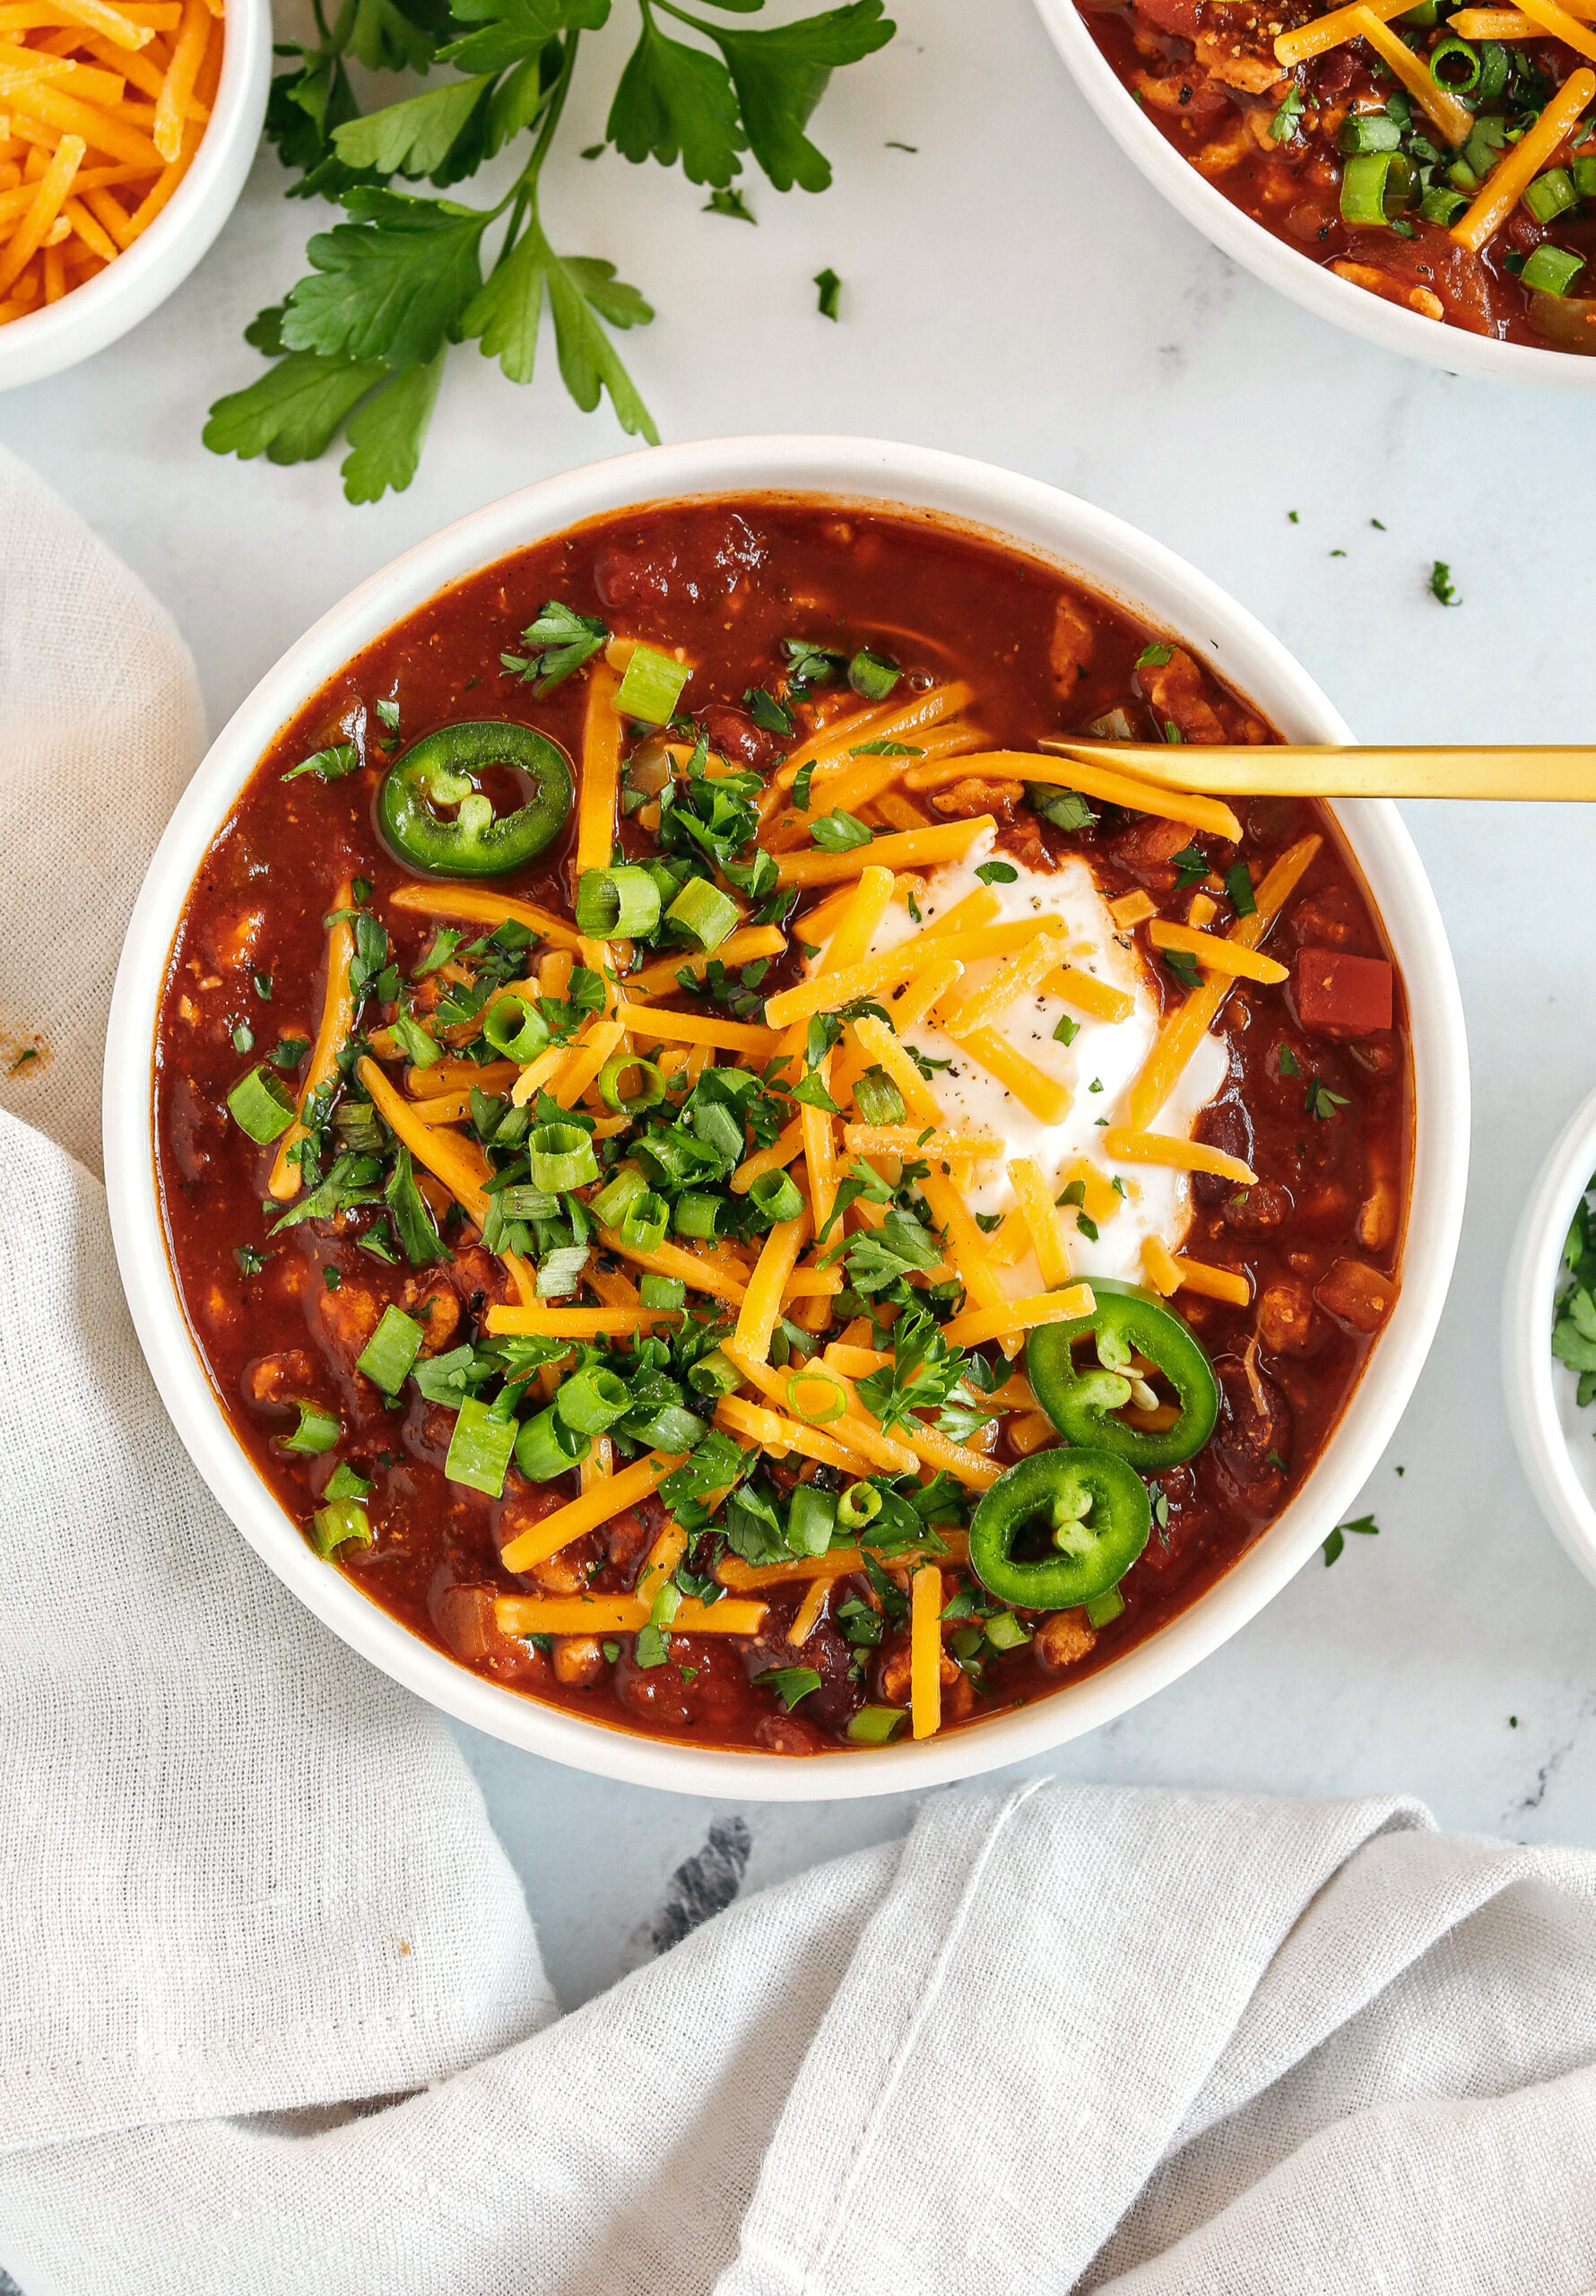 The BEST Healthy Turkey Chili recipe full of fresh veggies, lean ground turkey and loaded with flavor!  The perfect cozy chili you can easily make in our instant pot, crock pot or right on the stove!